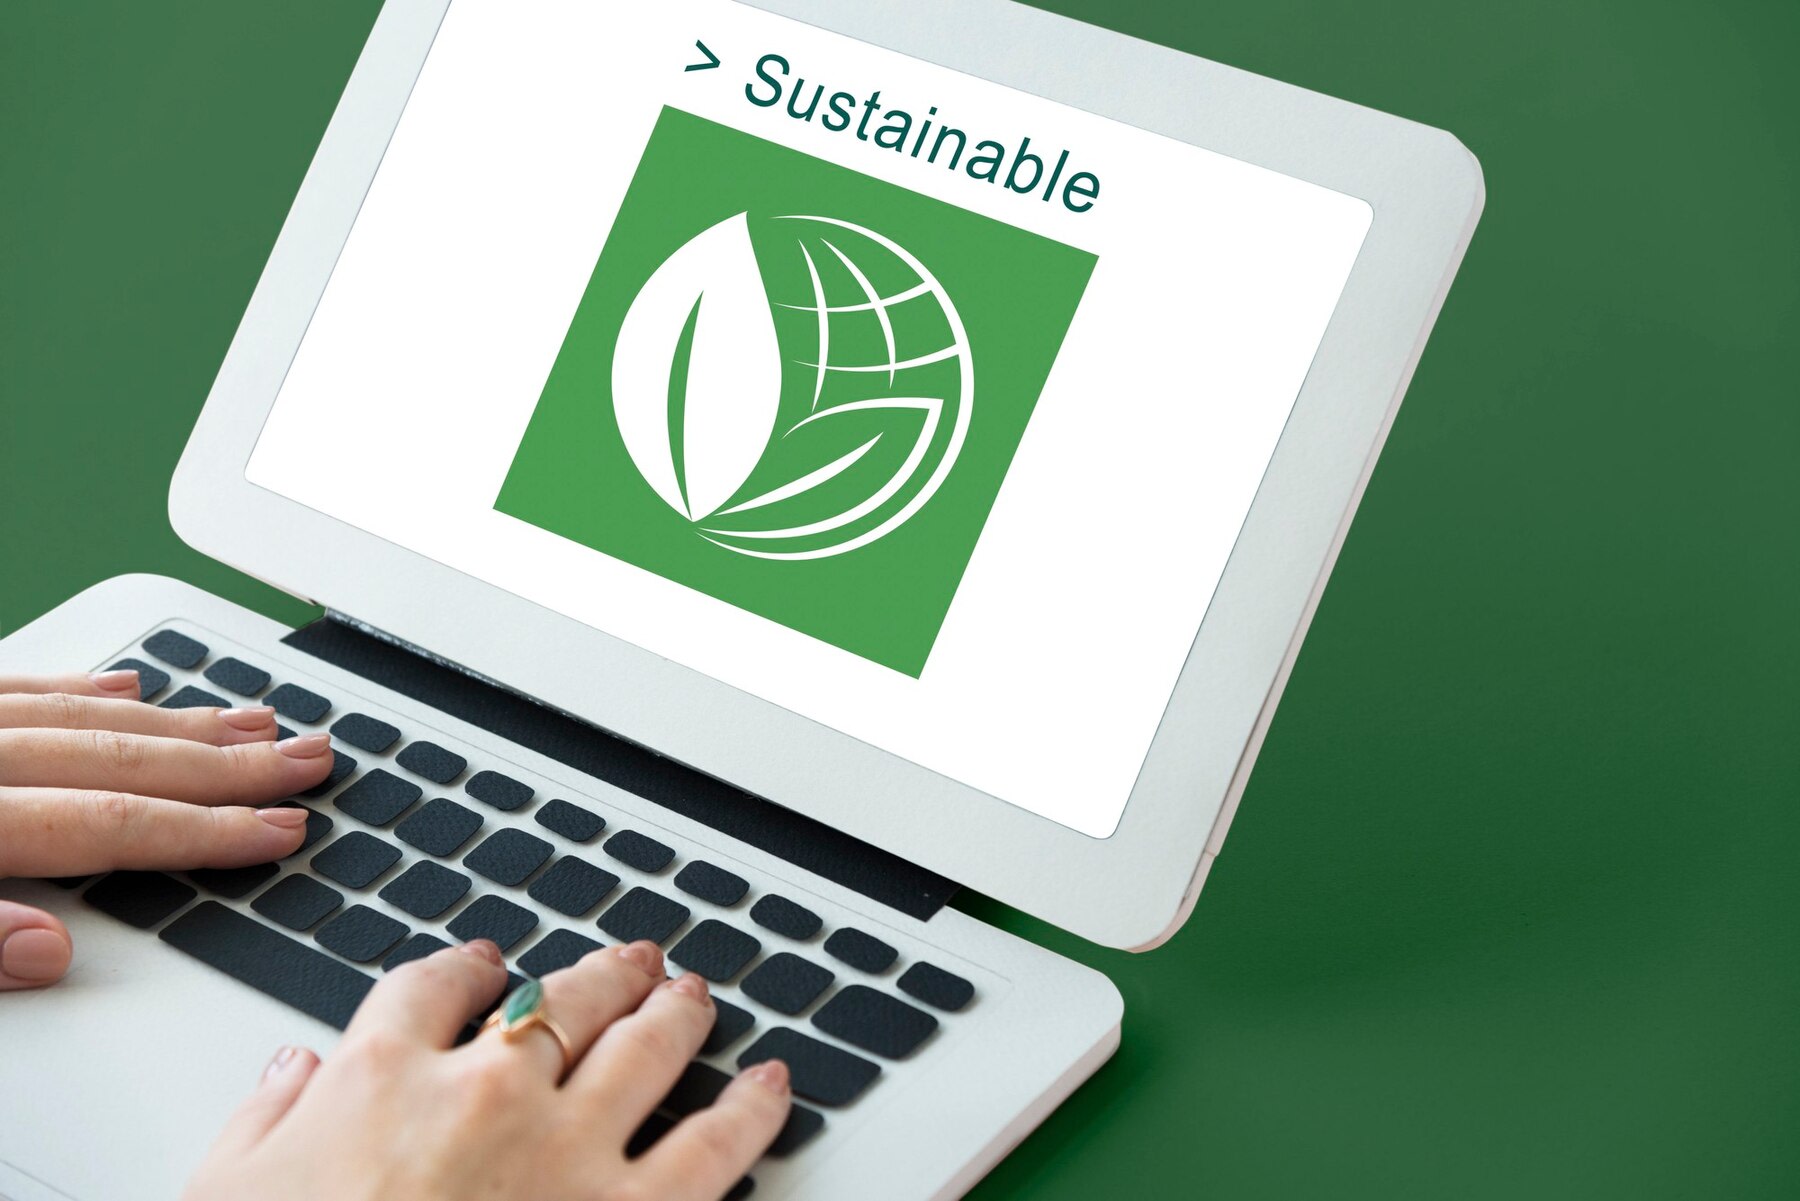 Image of laptop with sustainability program on it, inferring ESG reporting